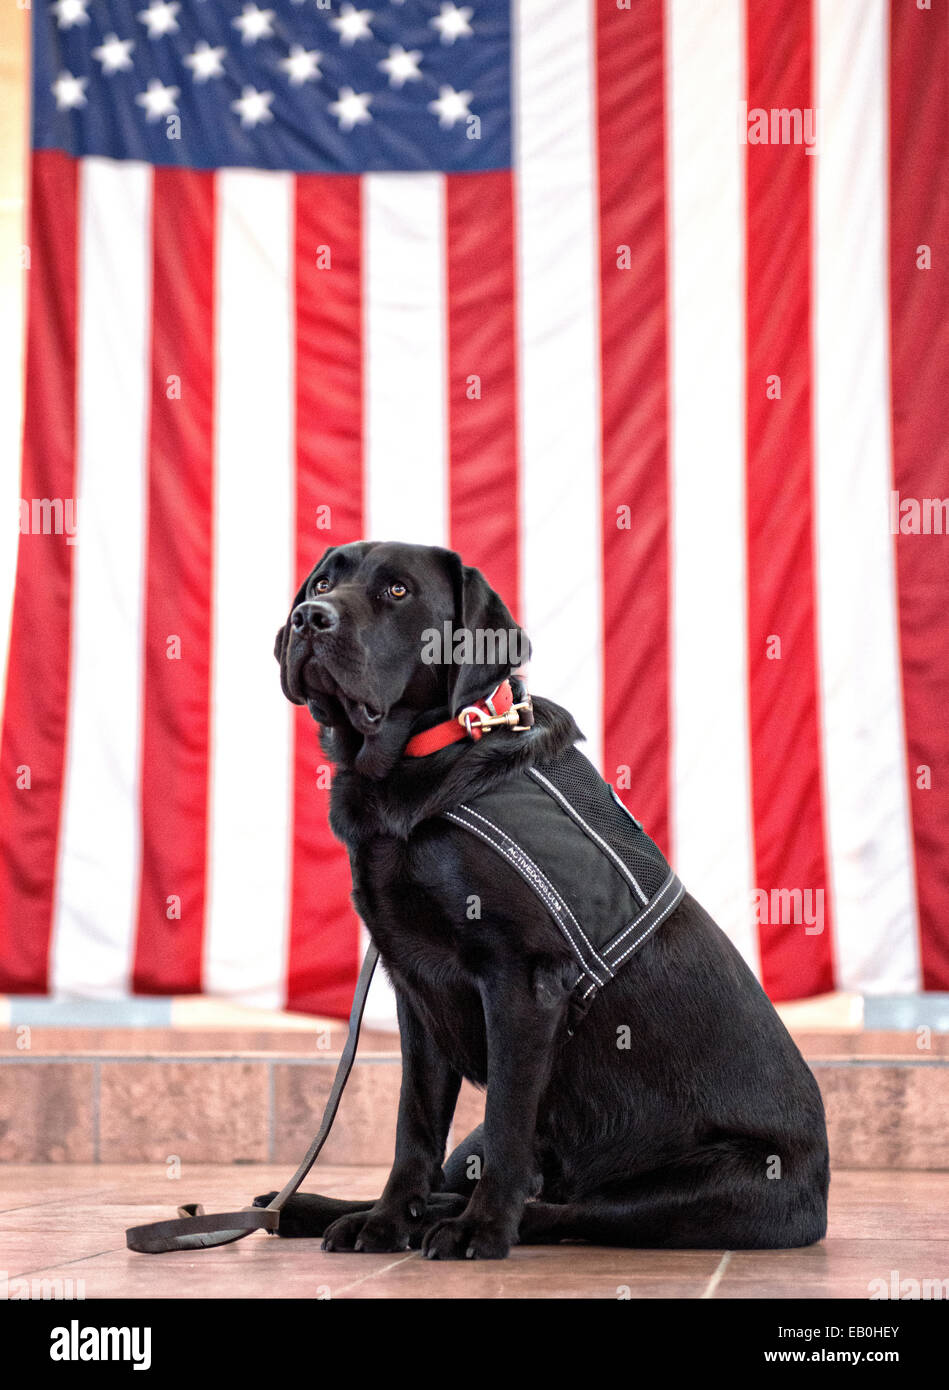 Zac, a US army service dog, waits in front of an American flag for travel to Kuwiat September 19, 2014 at Biggs Army Airfield, Texas. Stock Photo